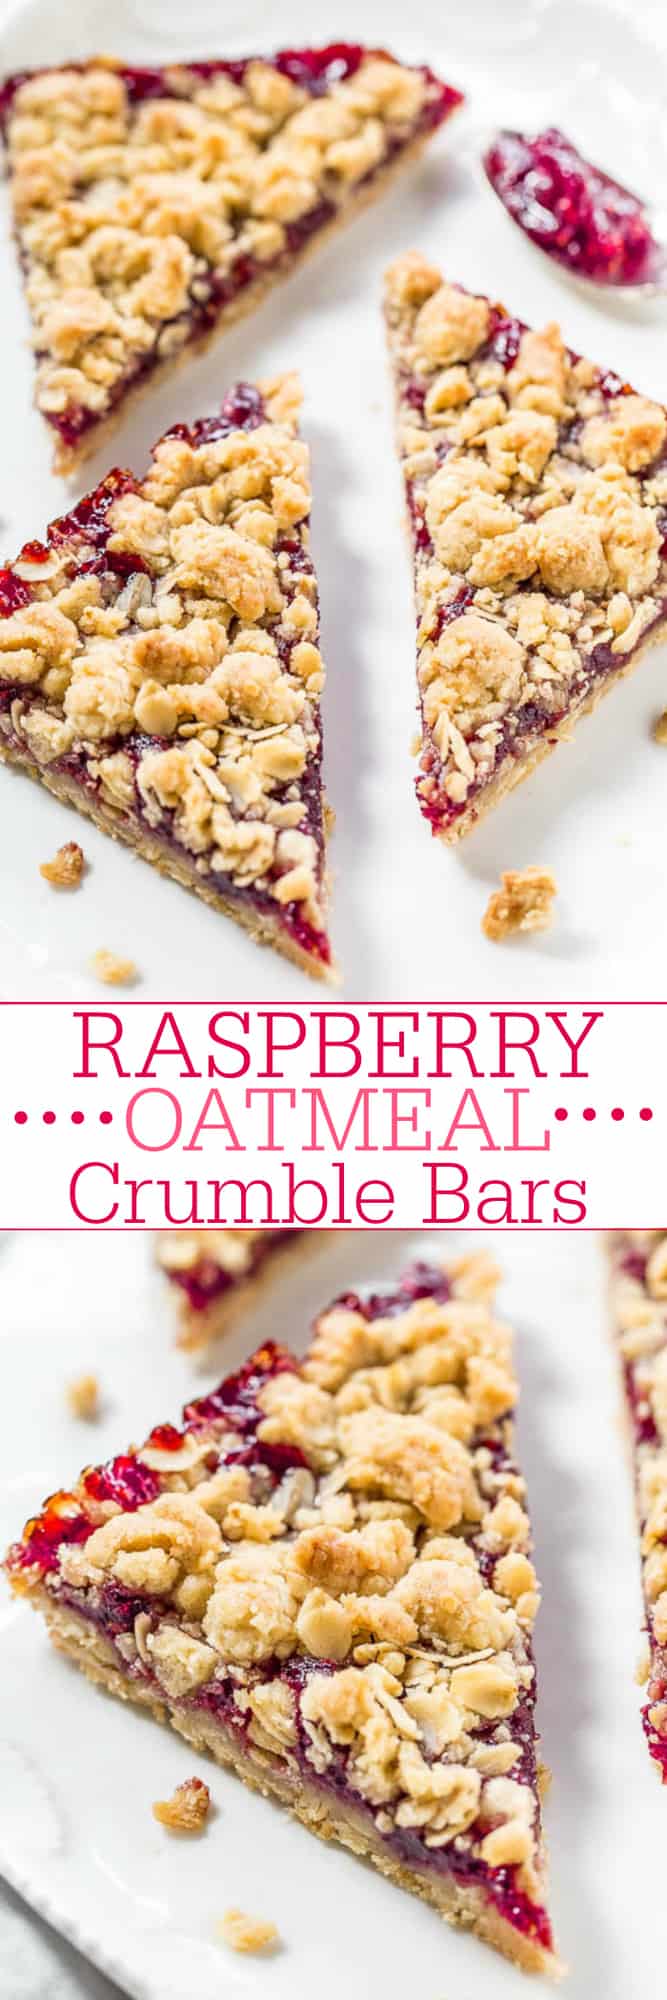 Raspberry Oatmeal Crumble Bars - Fast, easy, no-mixer bars great for breakfast, snacks, or a healthy dessert!! The big crumbles are irresistible! Fresh raspberries not needed so you can make the bars year round!!